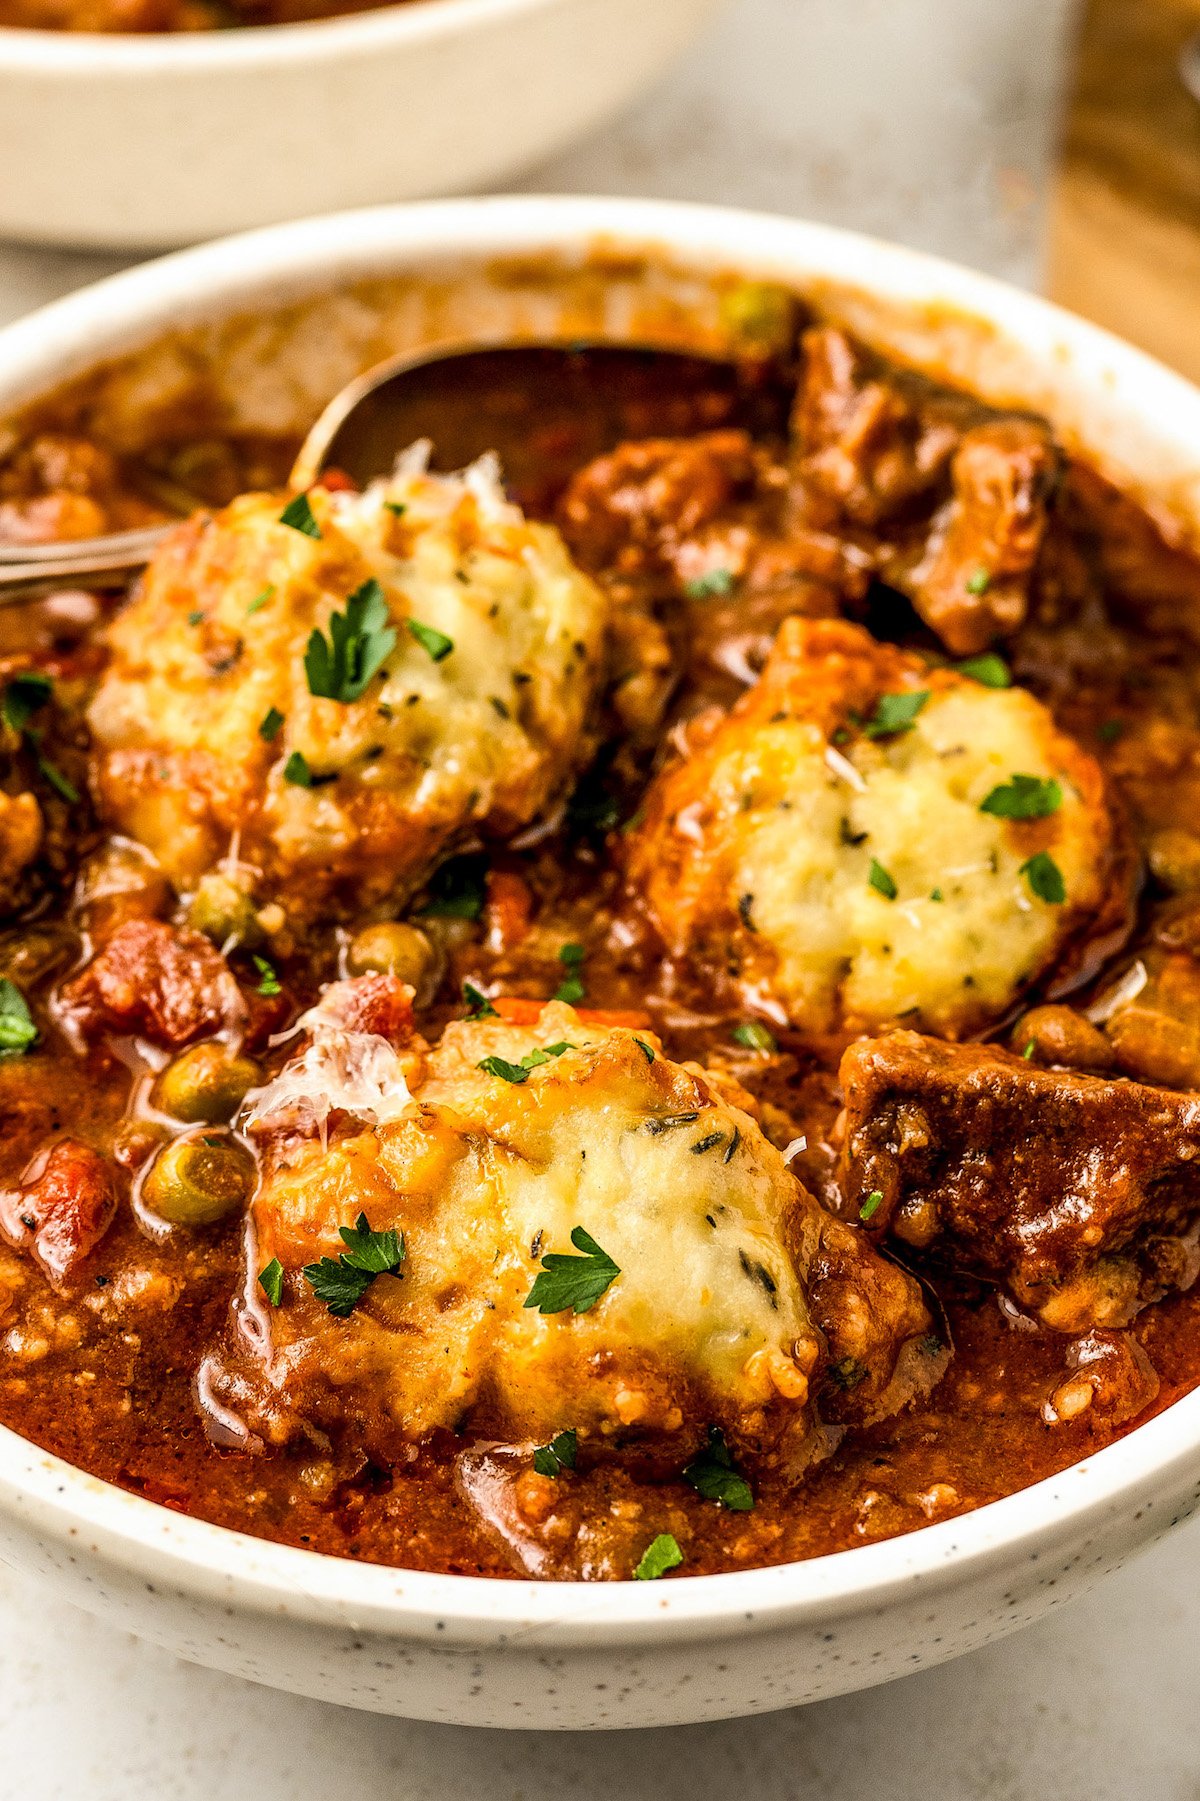 Hearty beef stew recipe with cheesy potato dumplings in a bowl topped with fresh parsley and grated parmesan cheese.